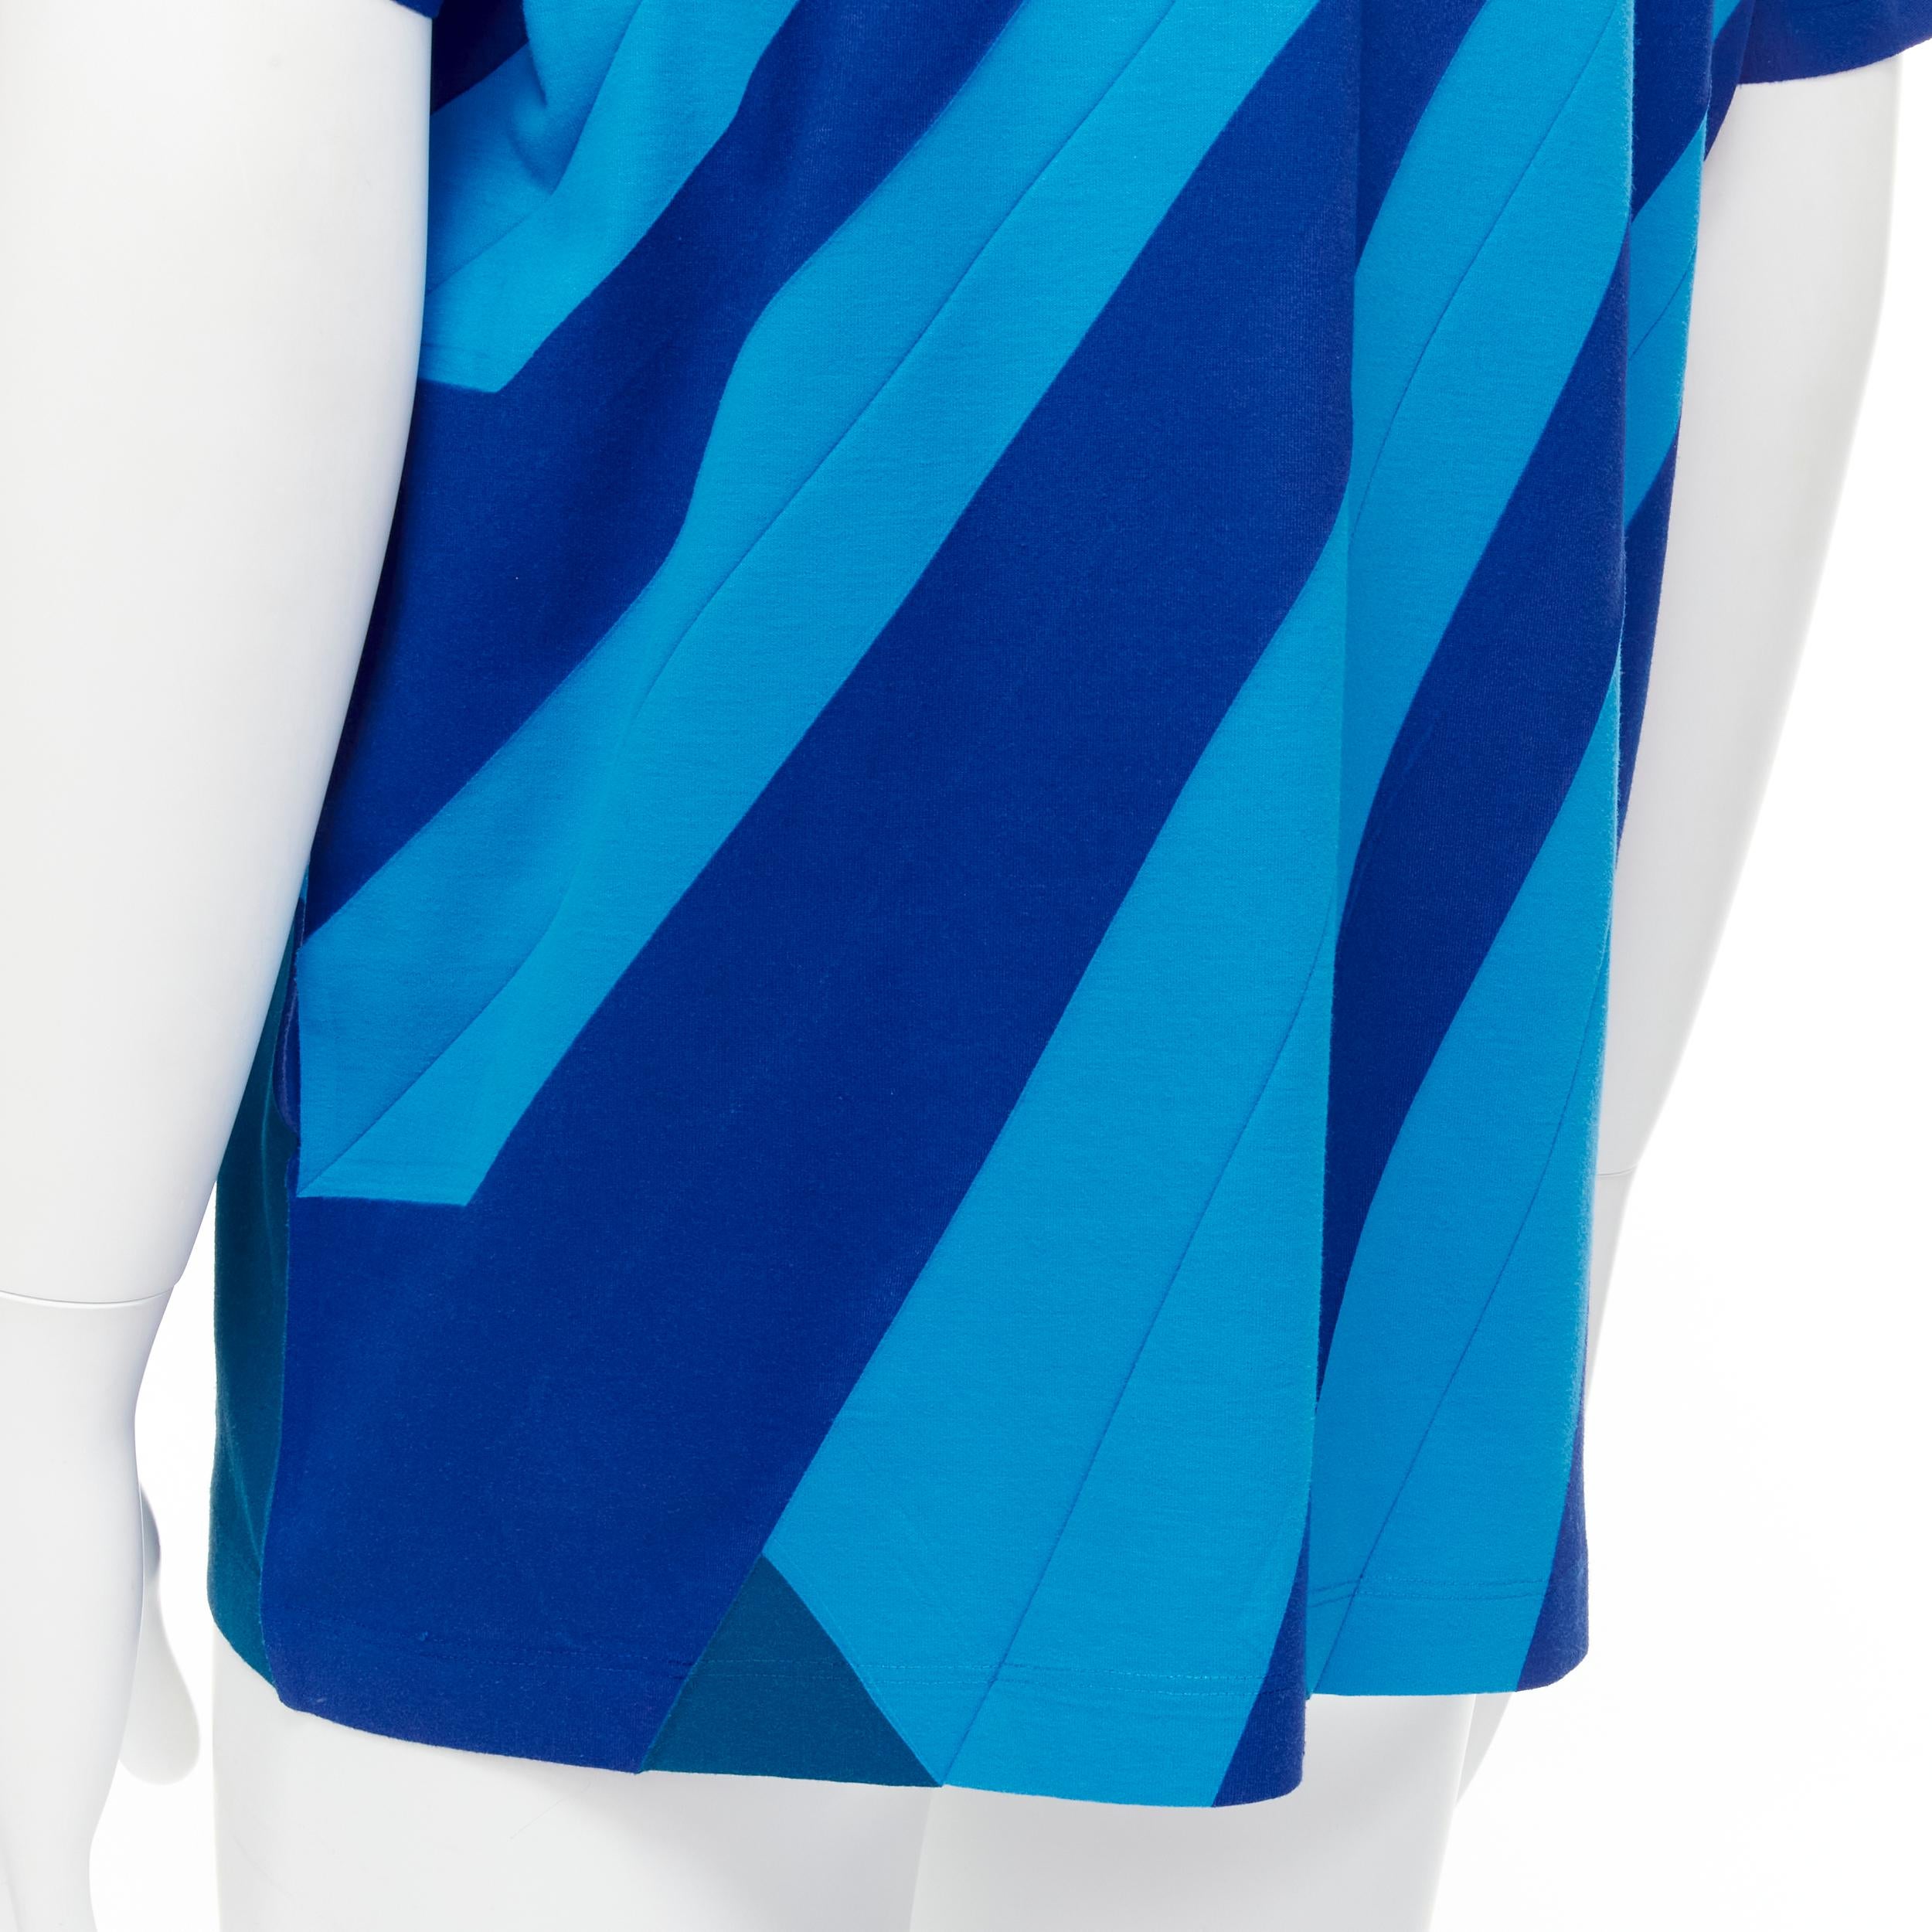 ISSEY MIYAKE MEN blue bonded pleat graphic print tshirt M 
Reference: INYG/A00010 
Brand: Issey Miyake Men 
Material: Cotton 
Color: Blue 
Pattern: Graphic 
Extra Detail: Graphic print with pleat. 
Estimated Retail Price: US $250 
Made in: Japan